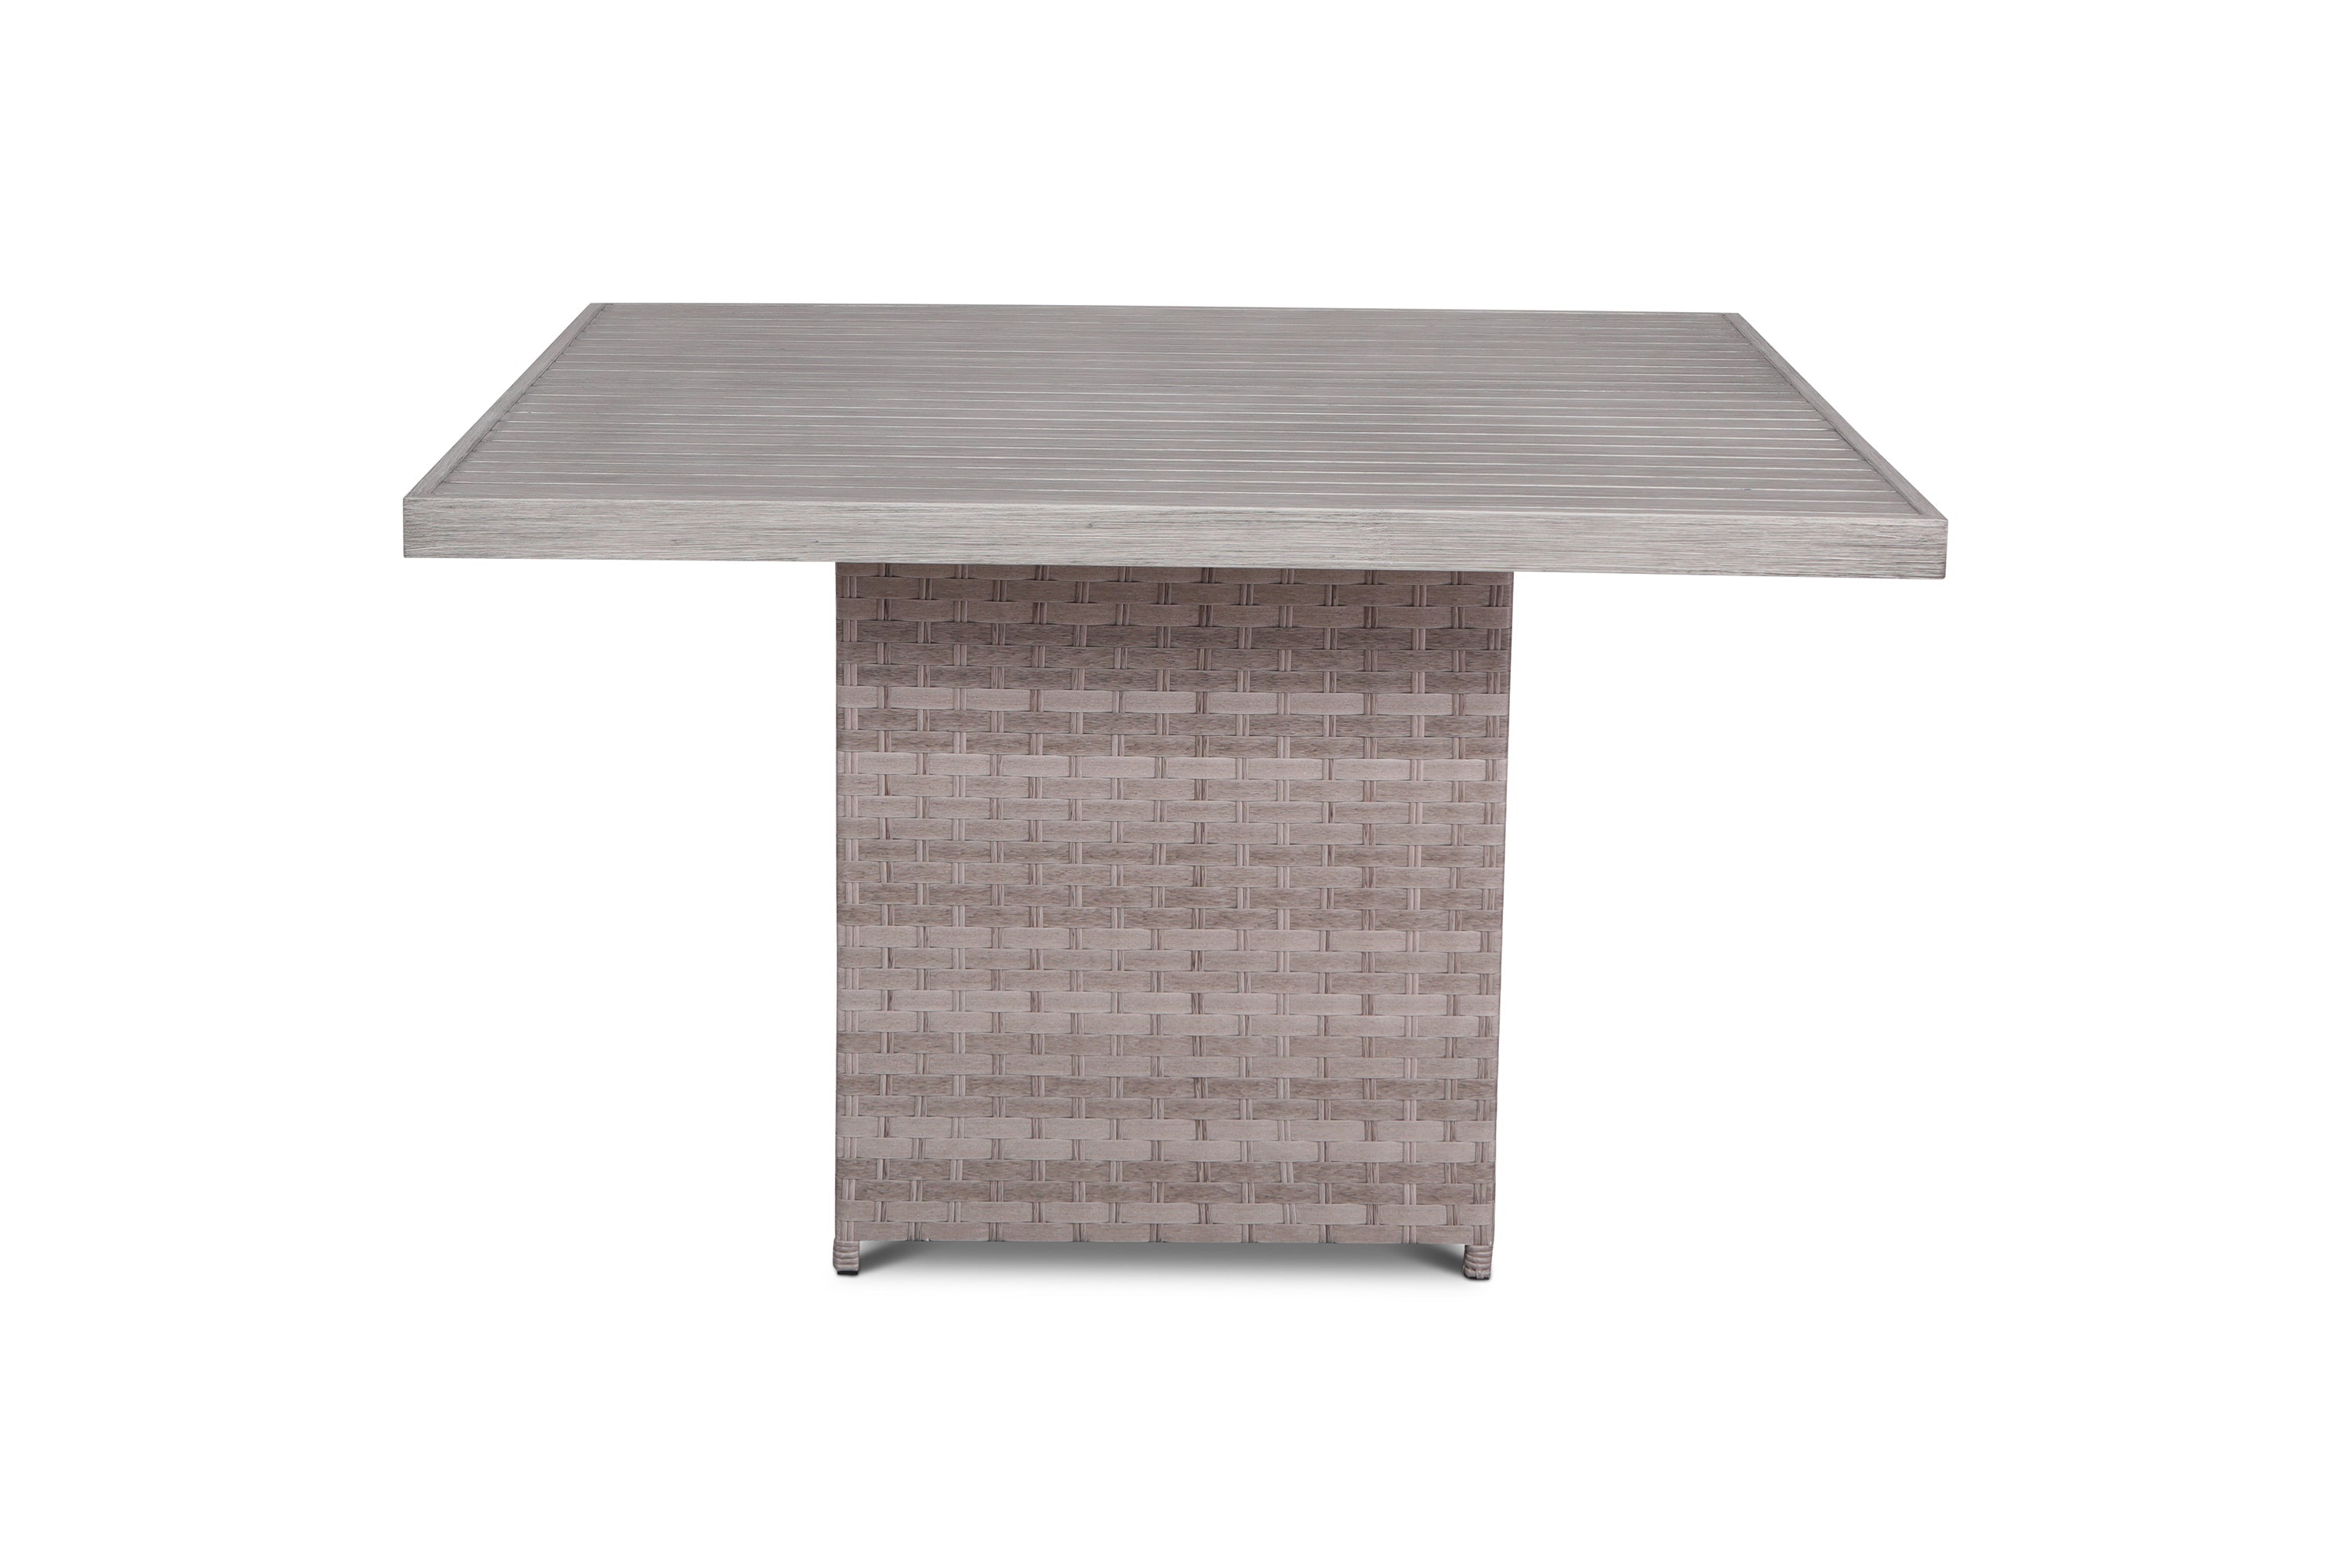 Kensington Square Outdoor Wicker Dining Table